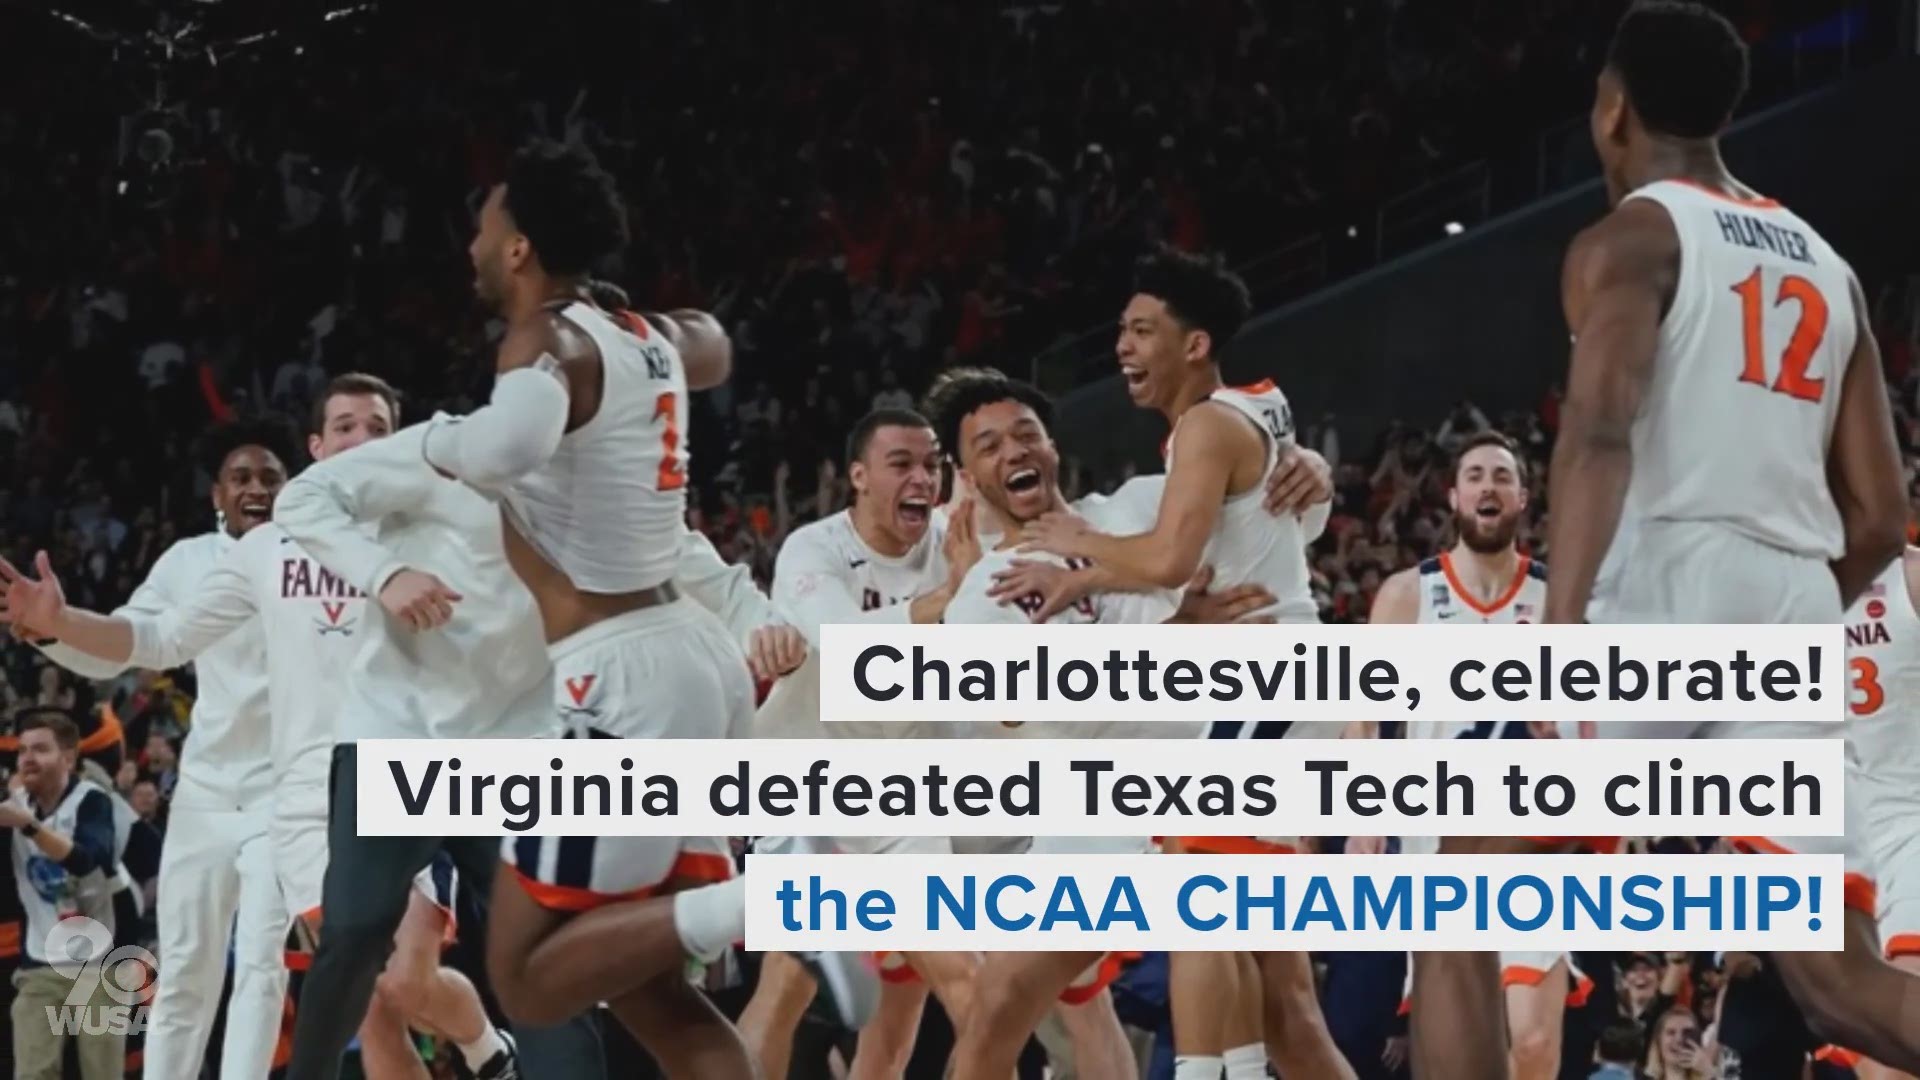 Monday night's win marks the first NCAA title for the UVA program.